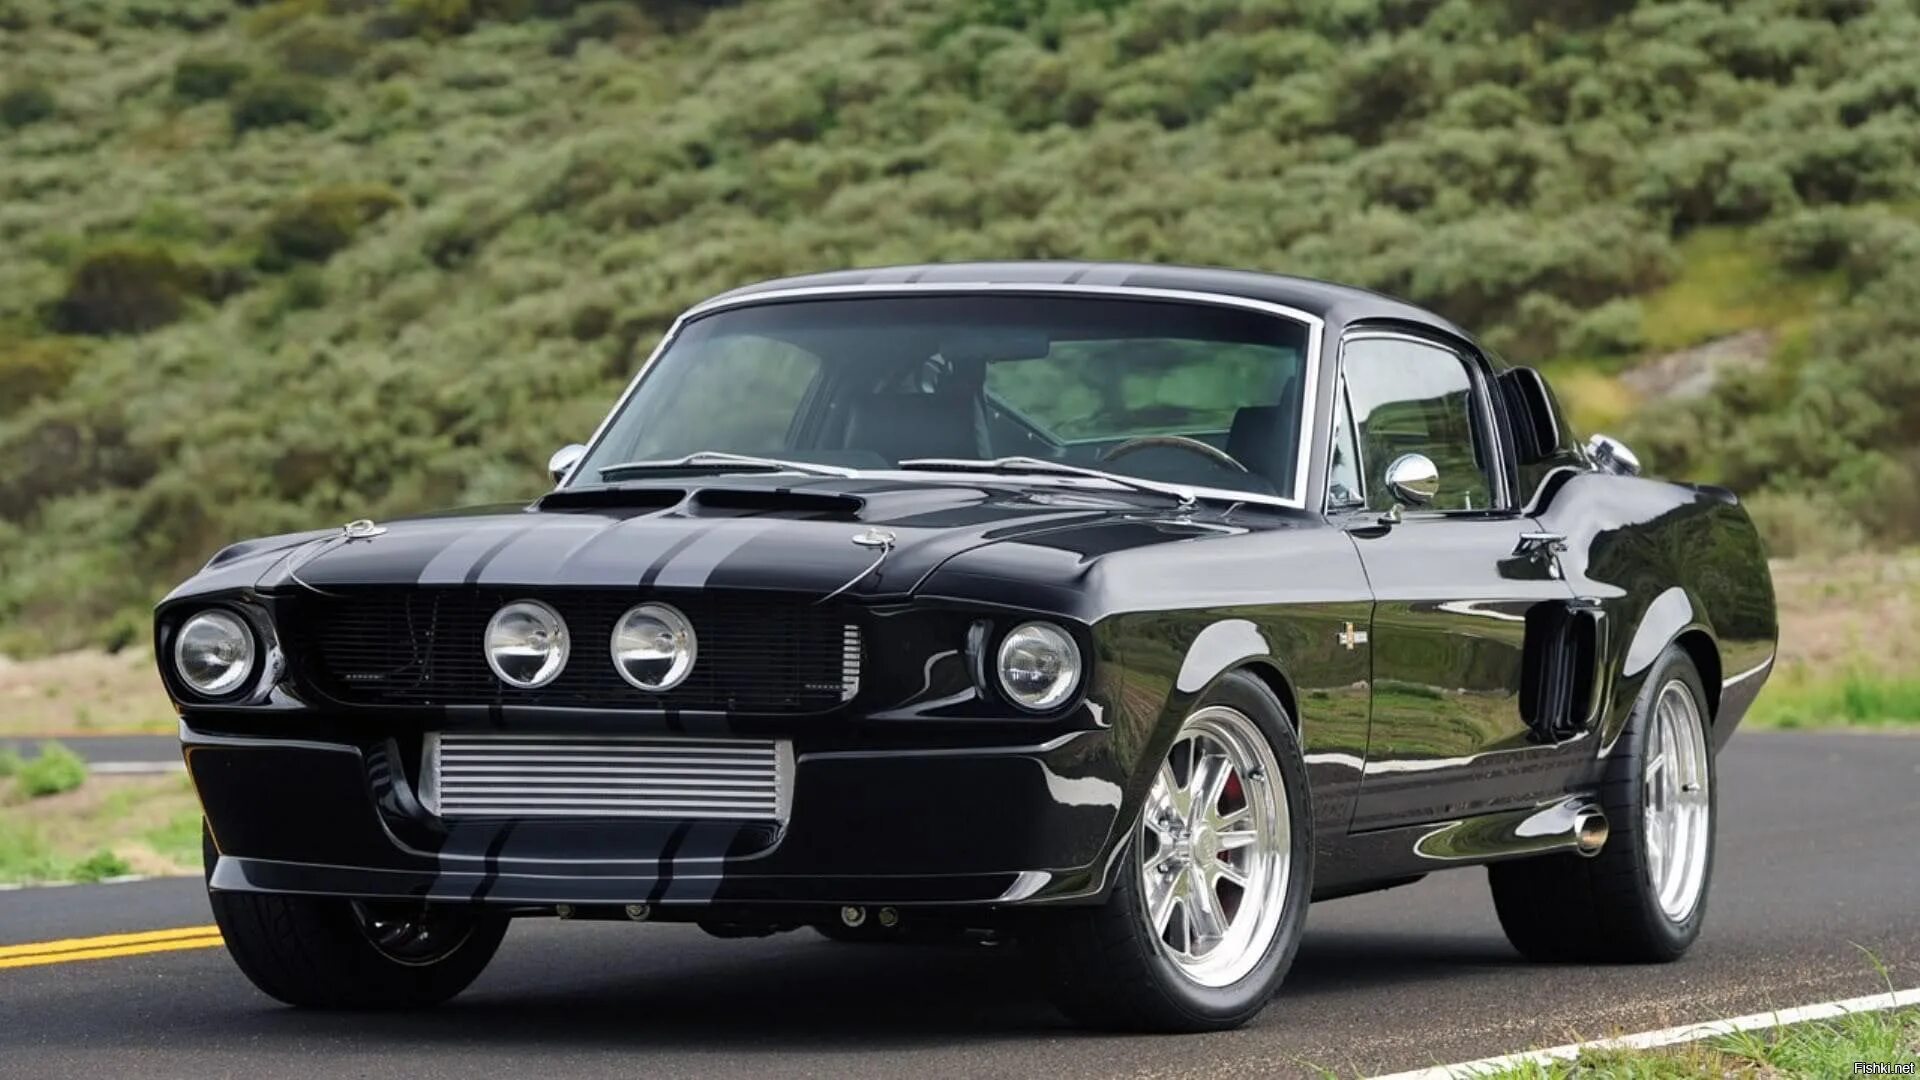 Mustang shelby gt. Форд Мустанг 1967 Shelby. Форд Мустанг Шелби 500. Форд Мустанг gt 500 1967. Форд Мустанг Шелби gt 500 1967.